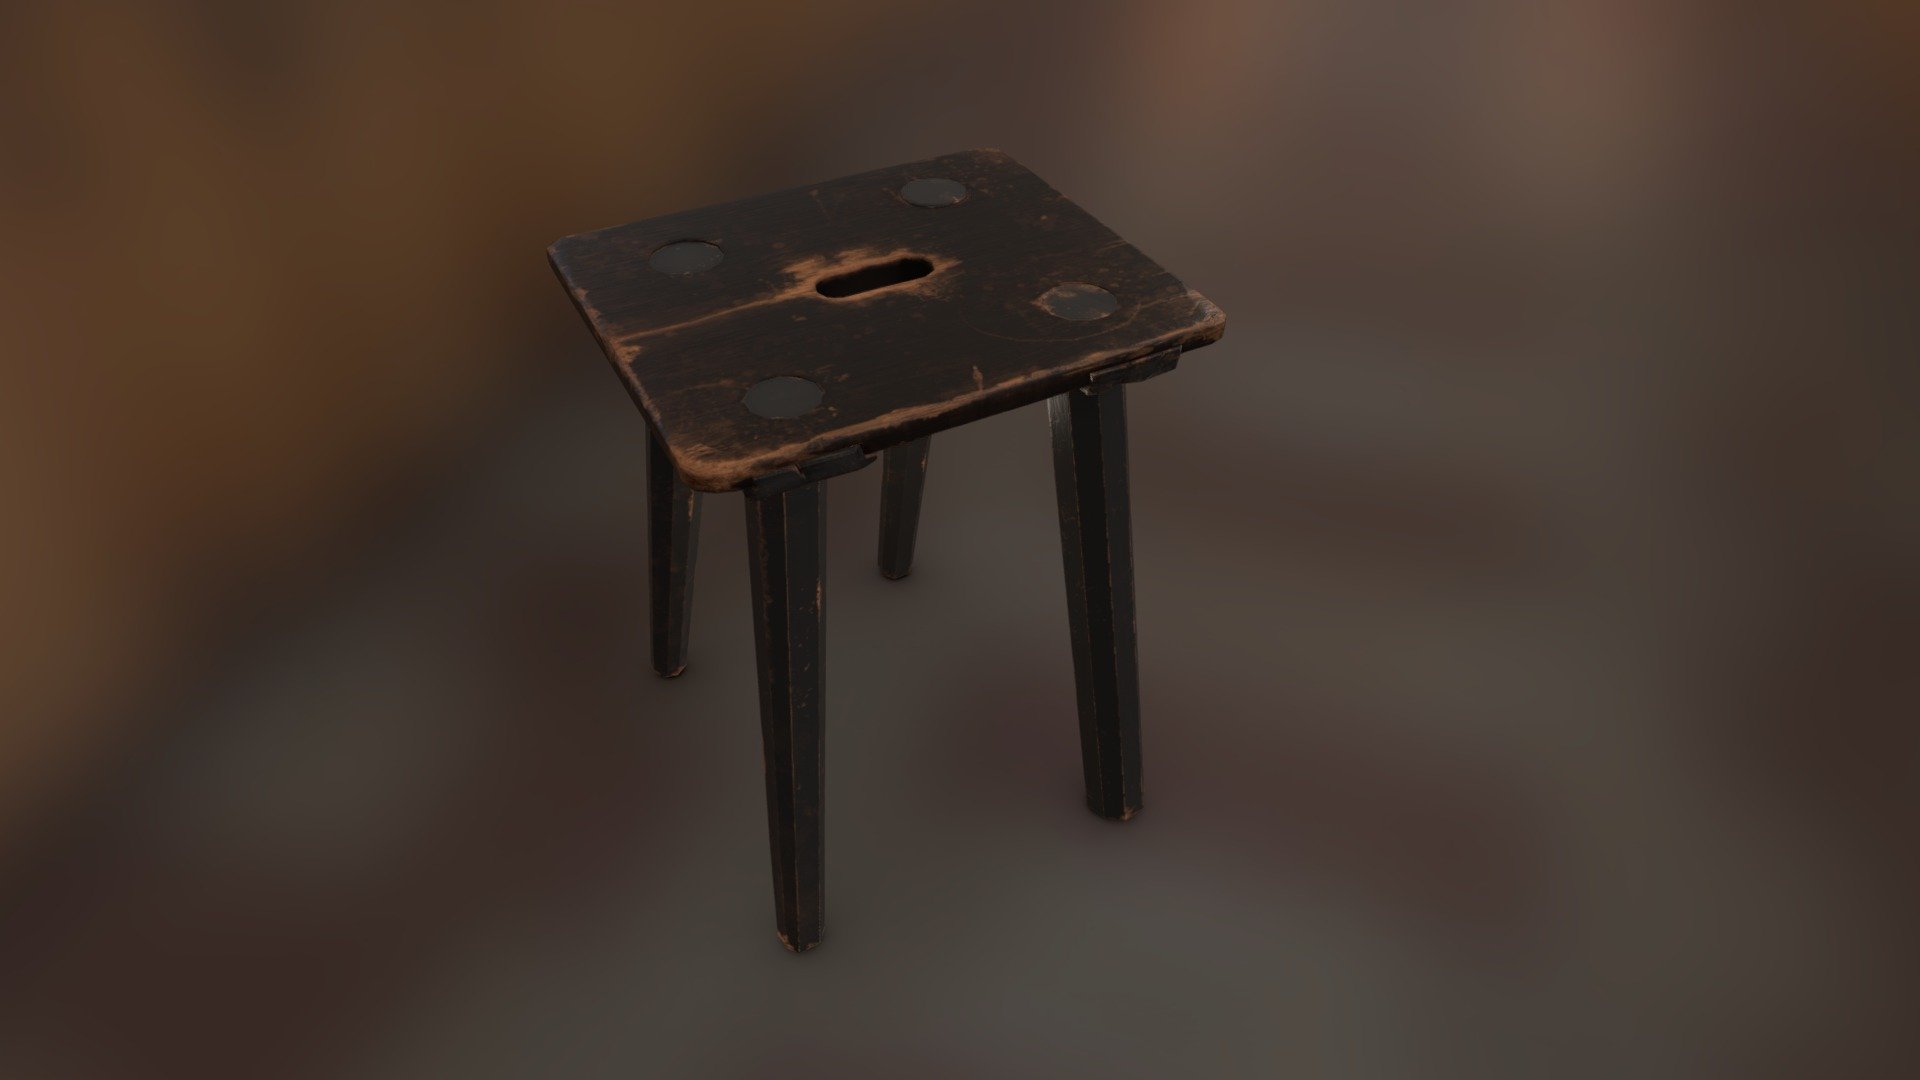 Small wooden stool recreation of a real life object. Modeled for the historical site of supposed Christian David's house at the Old Salem Musuem and Gardens 3d model